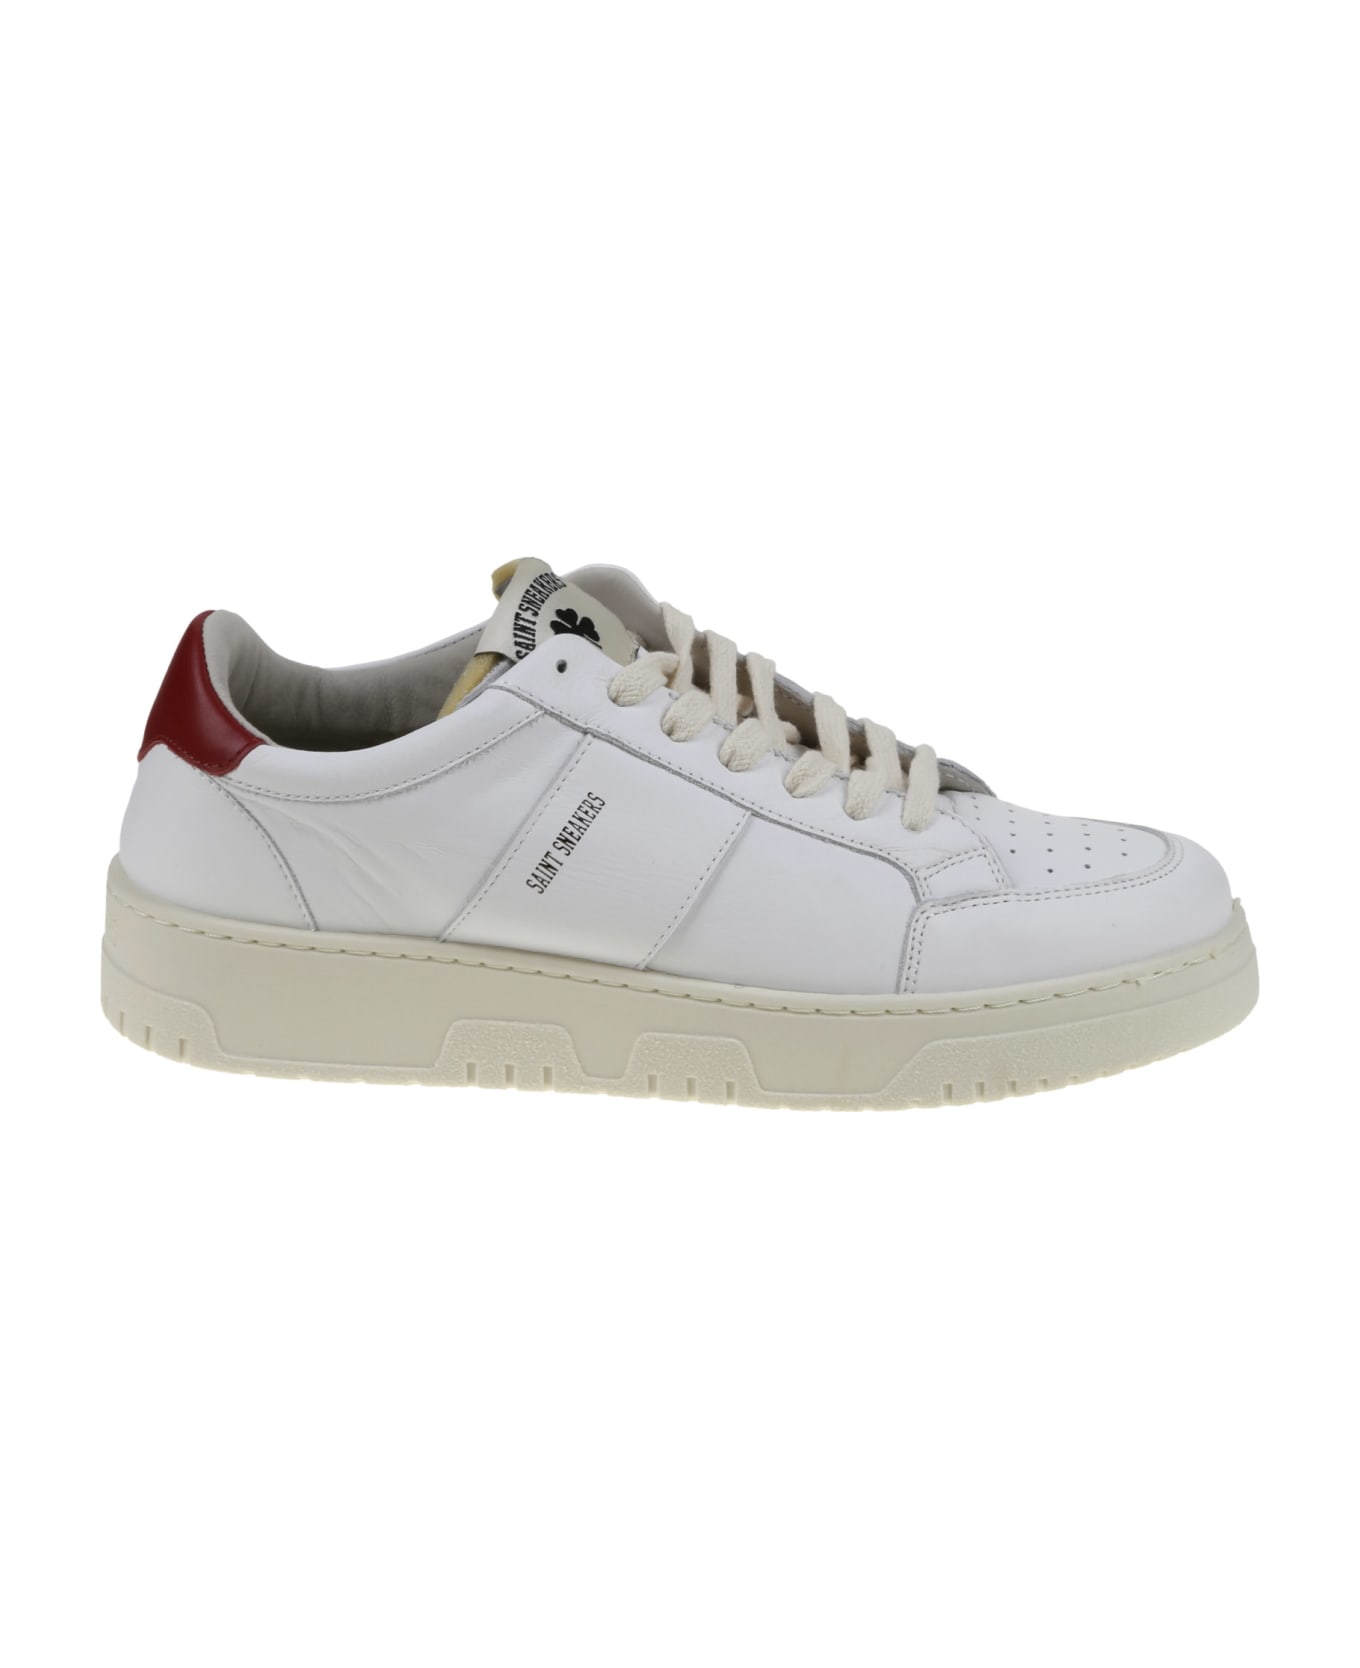 Saint Sneakers Golf - White Red